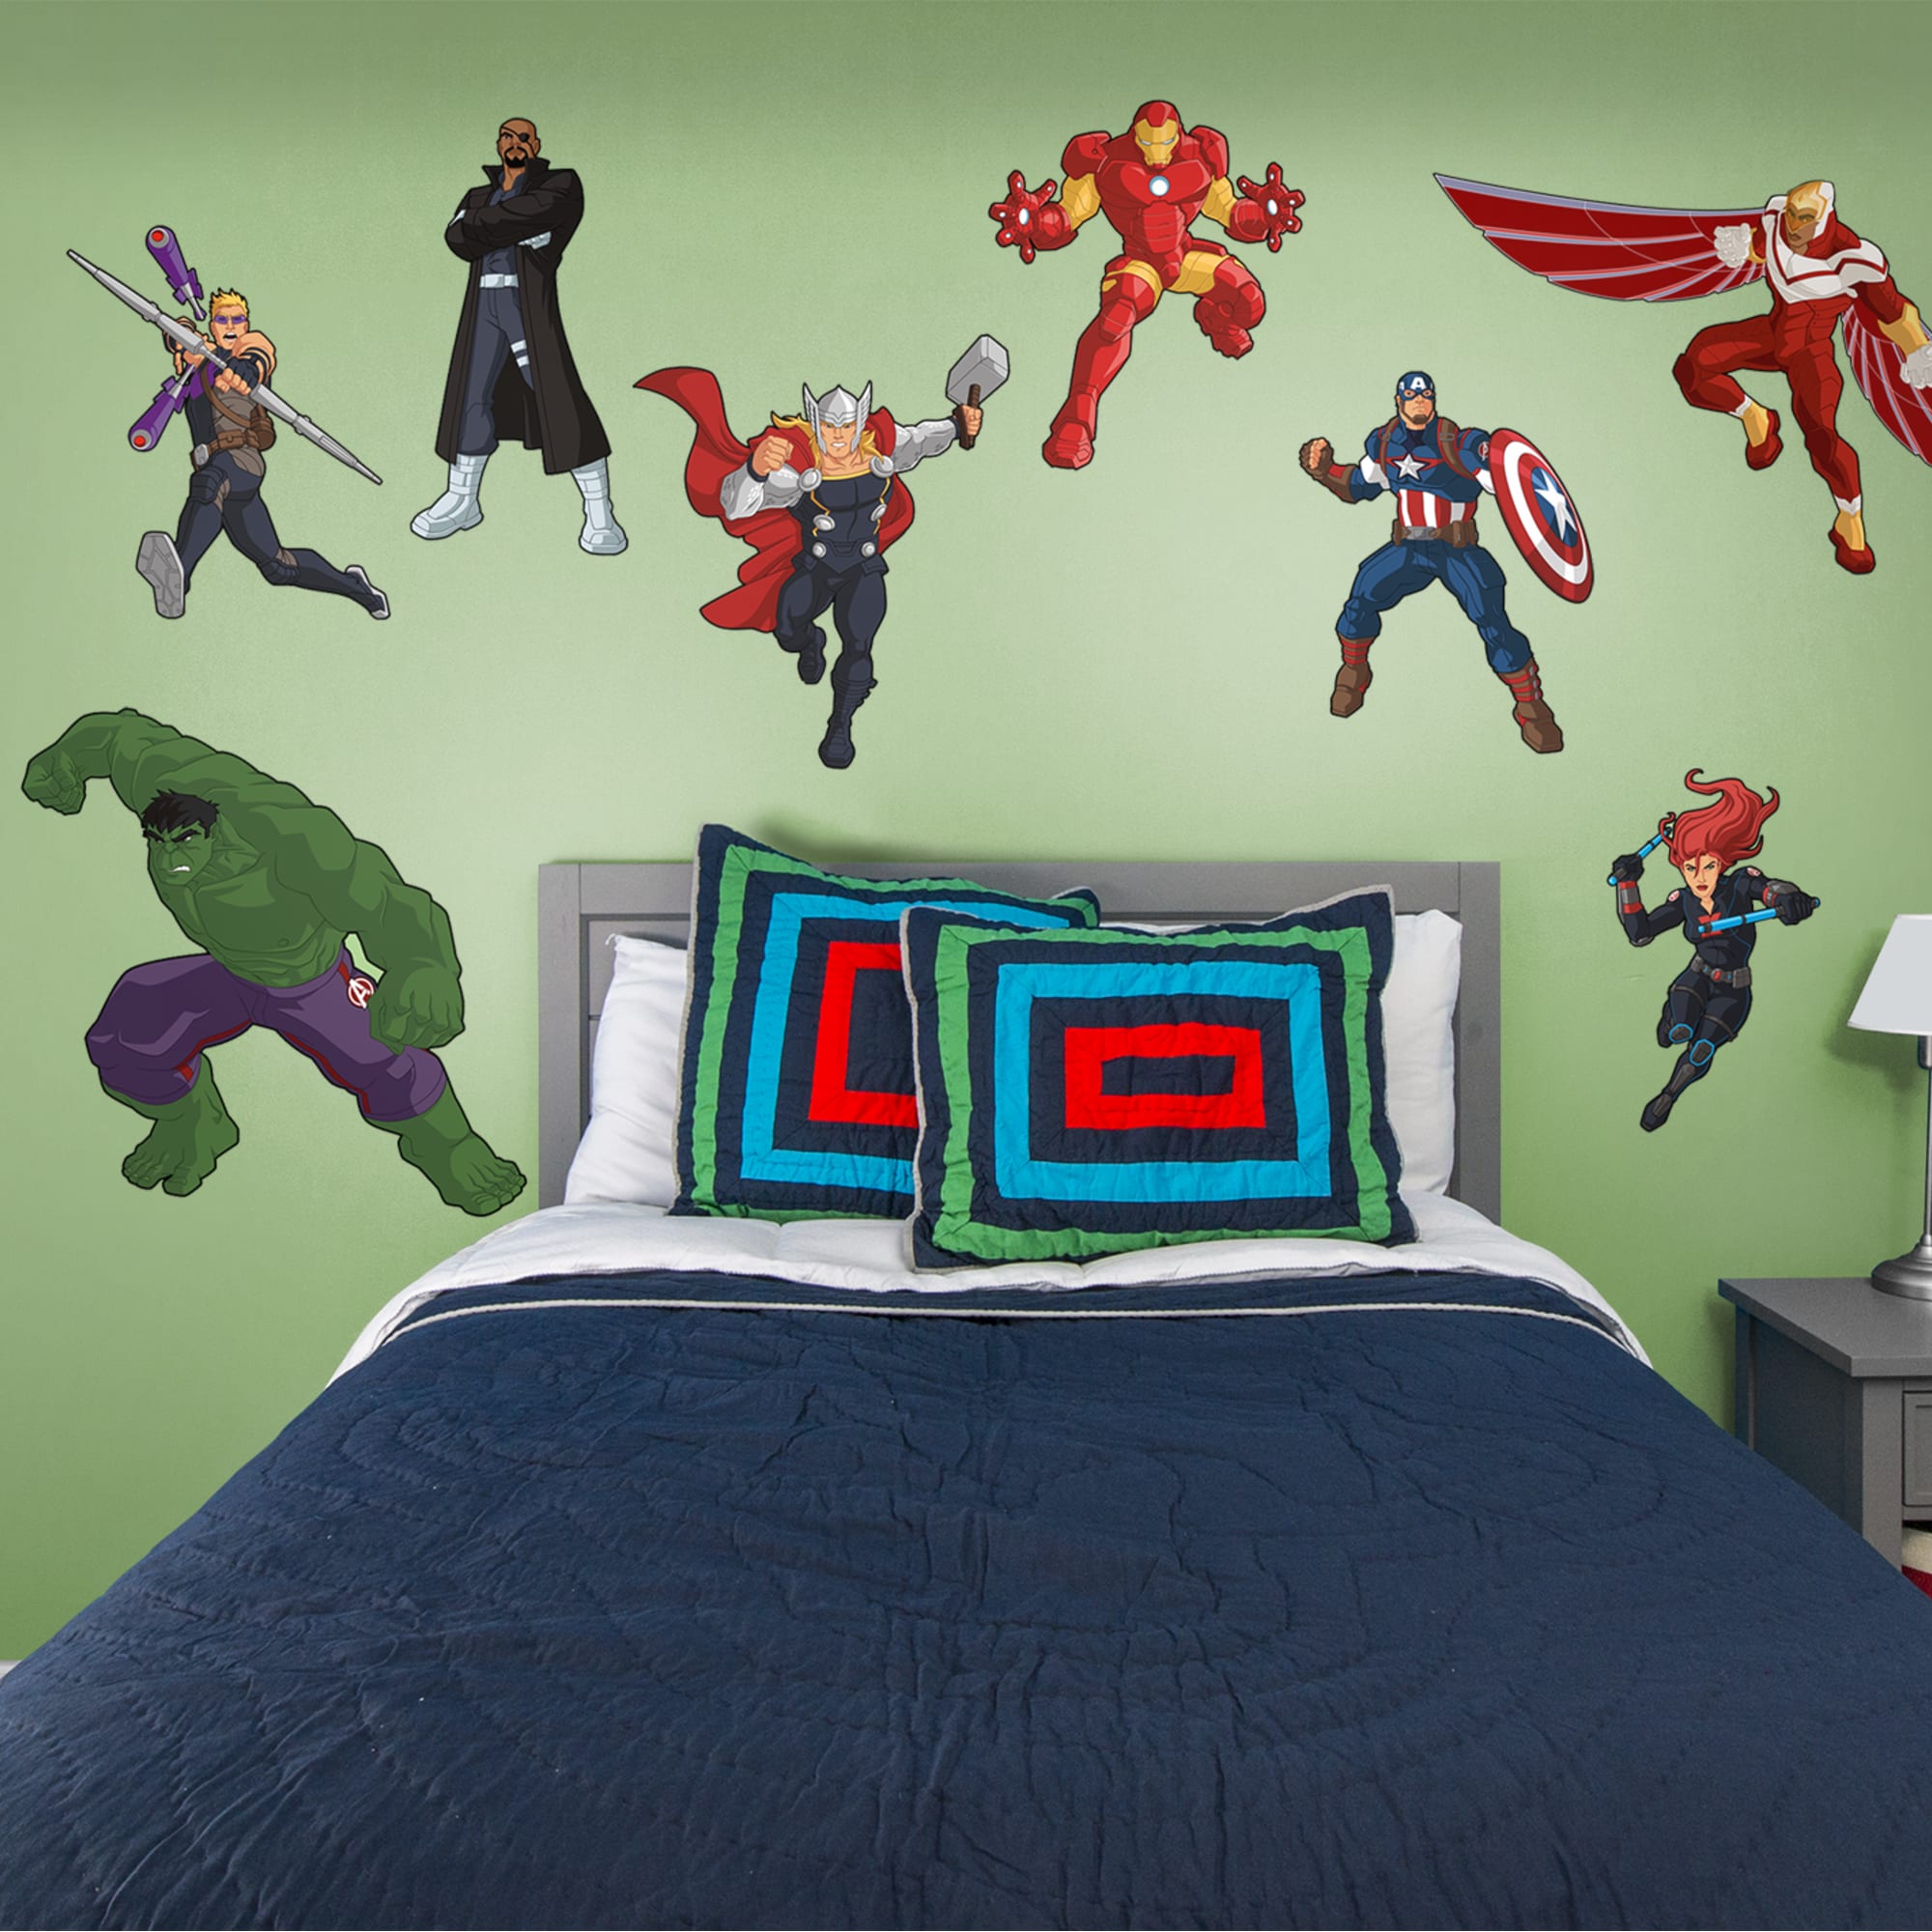 Avengers Assemble: Illustrated Collection - Officially Licensed Removable Wall Decal 79.0"W x 52.0"H by Fathead | Vinyl